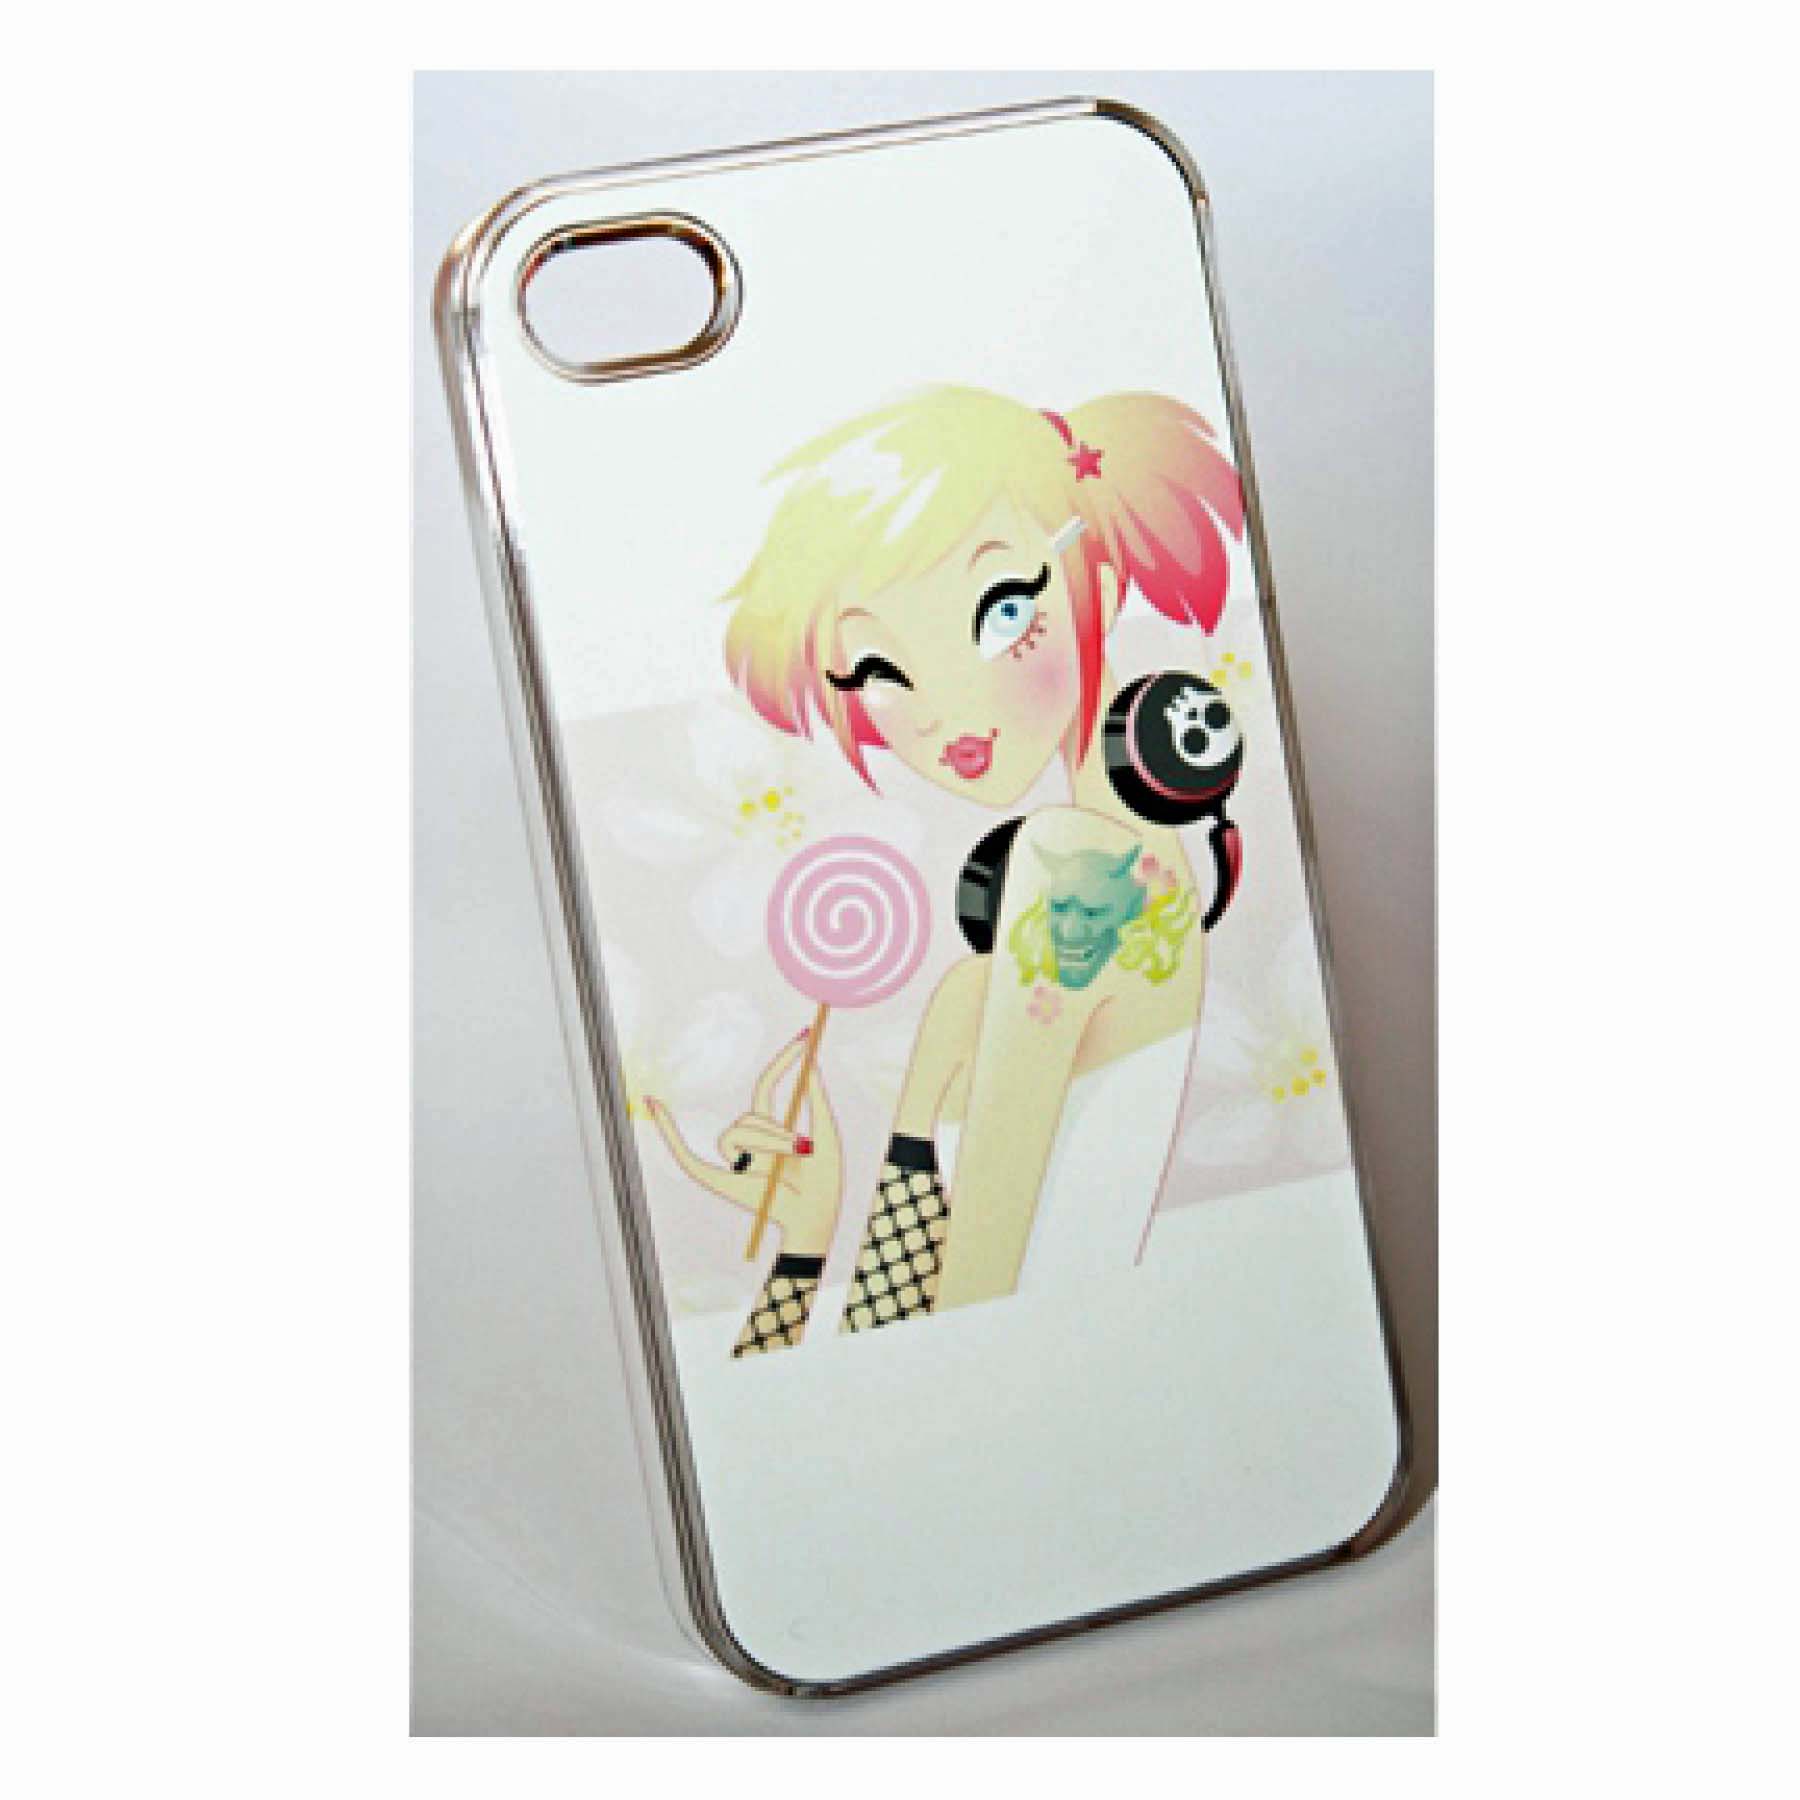 Harajuku iPhone Case made with sublimation printing